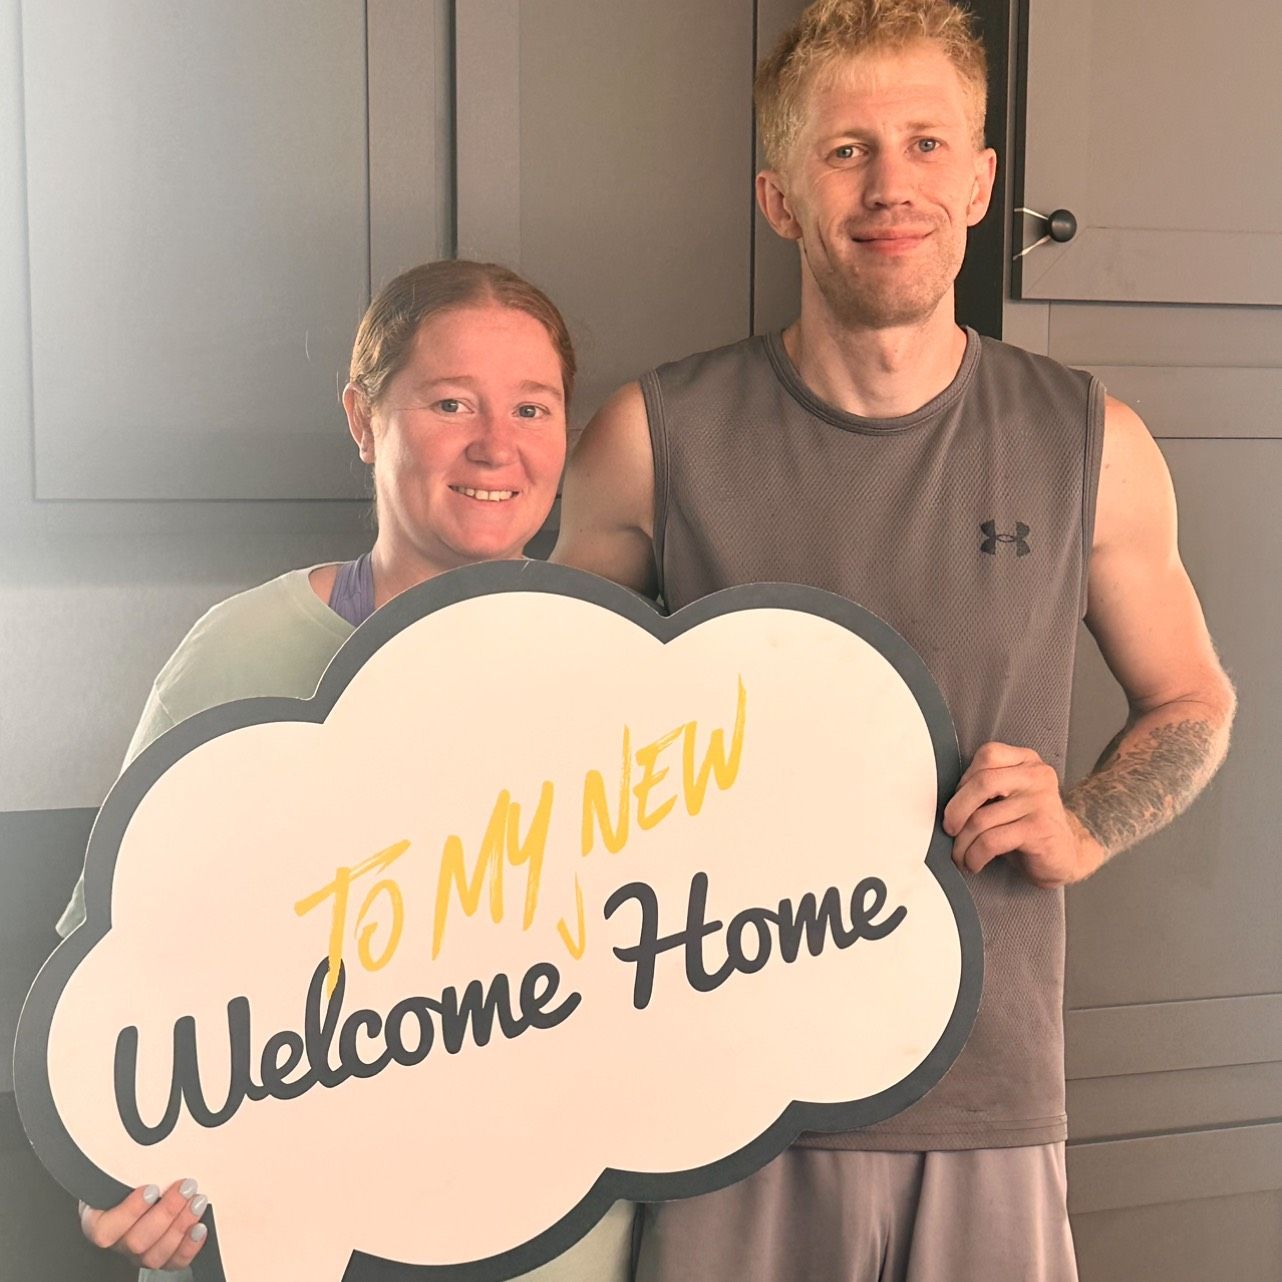 Justin K. welcome home image